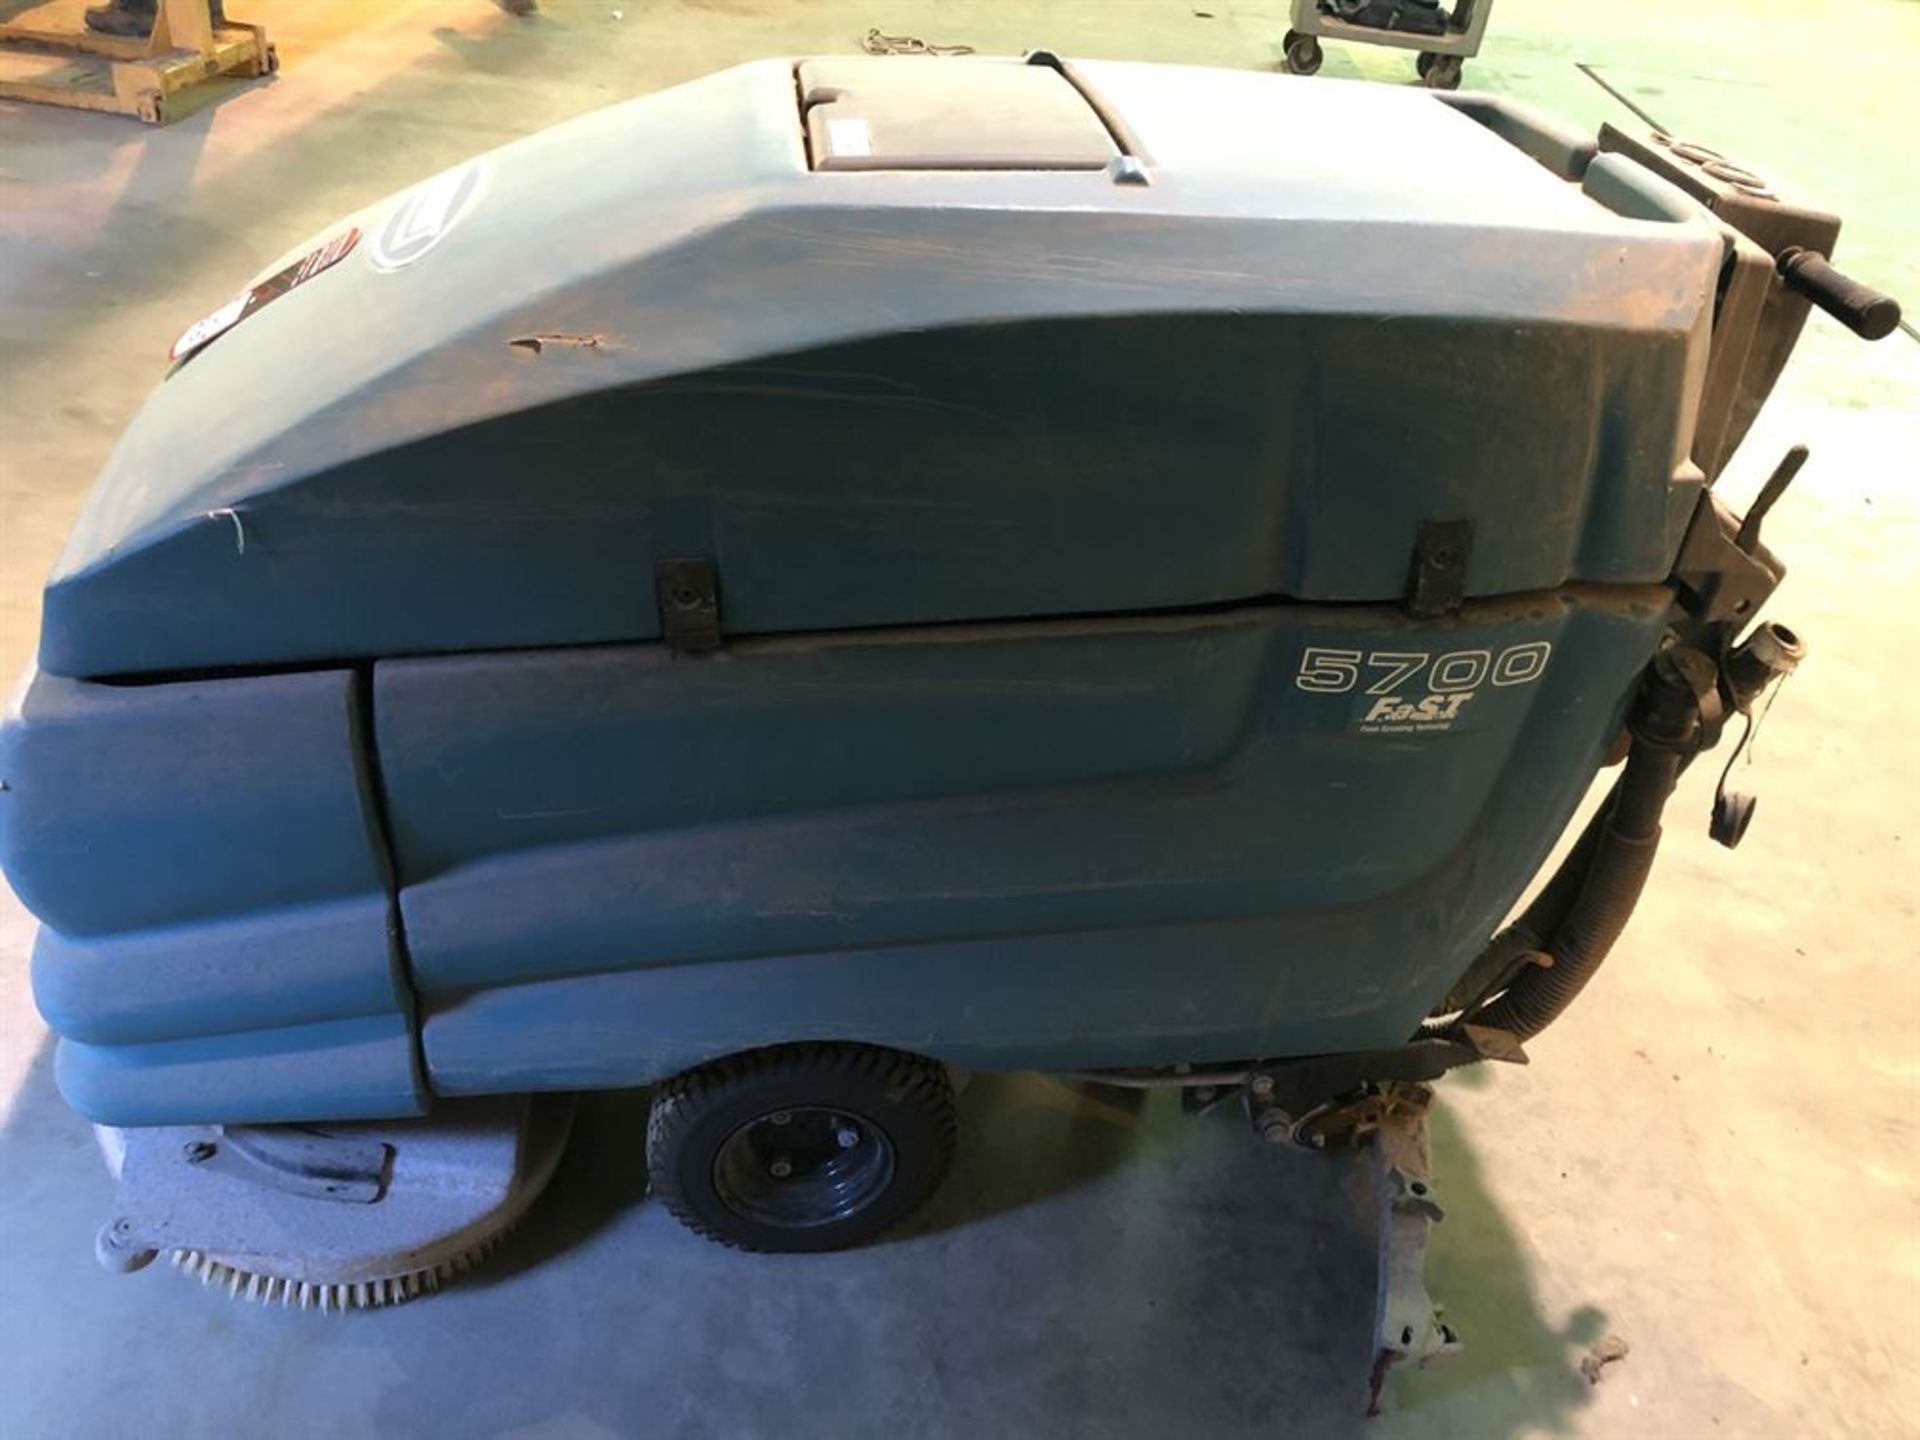 TENNANT 5700 Floor Sweeper, Battery Powered (Condition Unknown) (Location: Power House) - Image 2 of 2